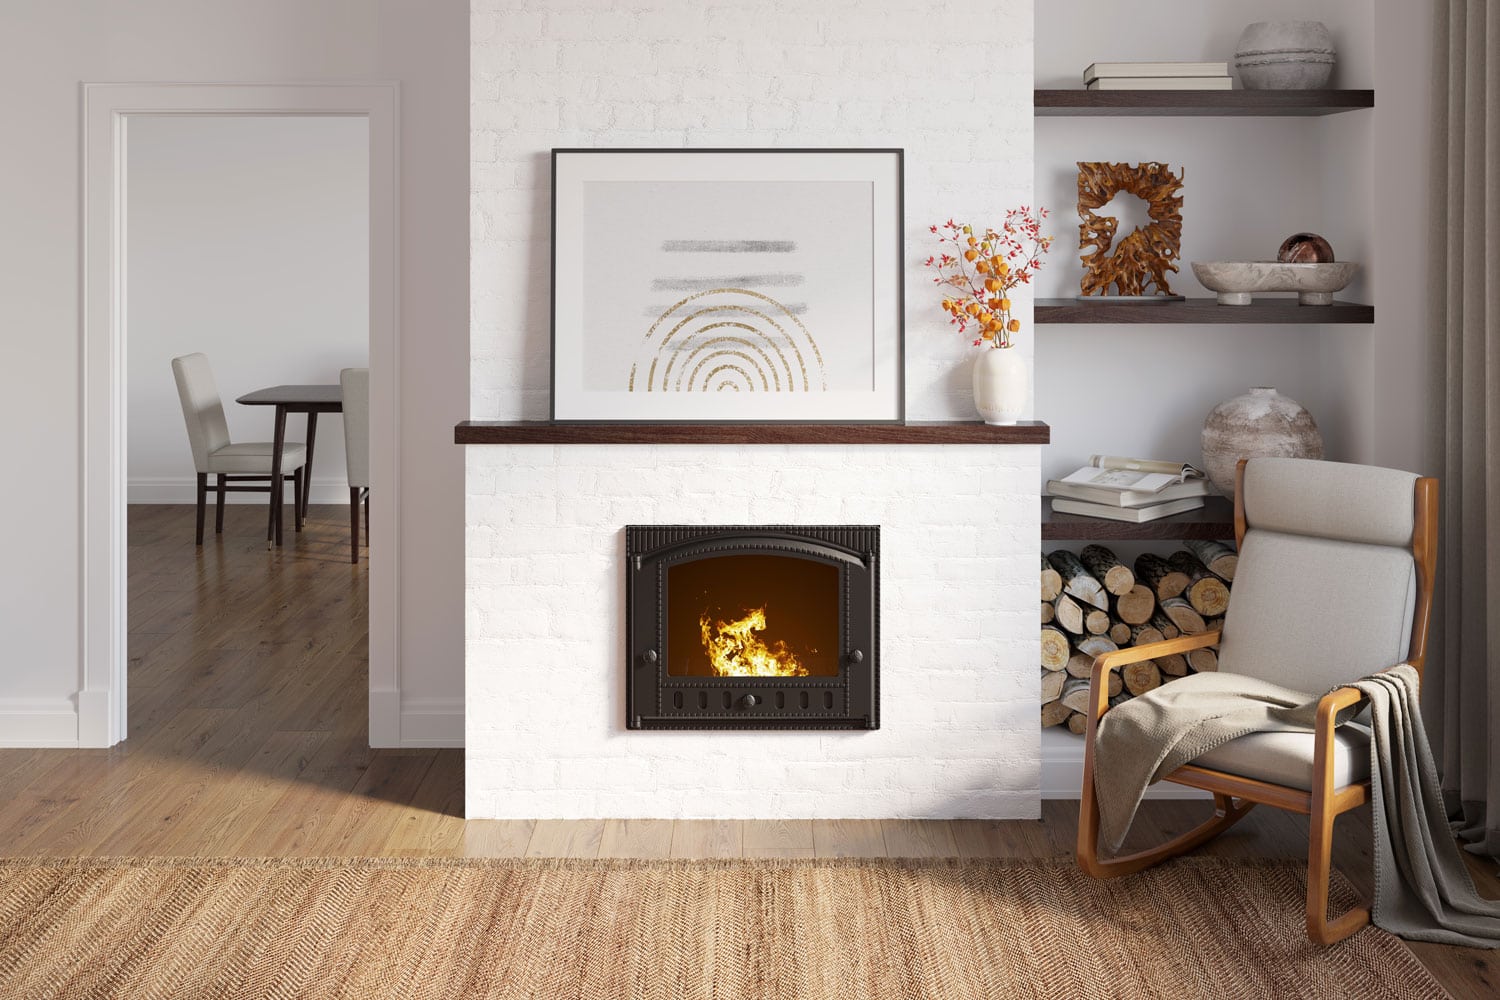 A white painted fireplace inside a white living room with laminated flooring